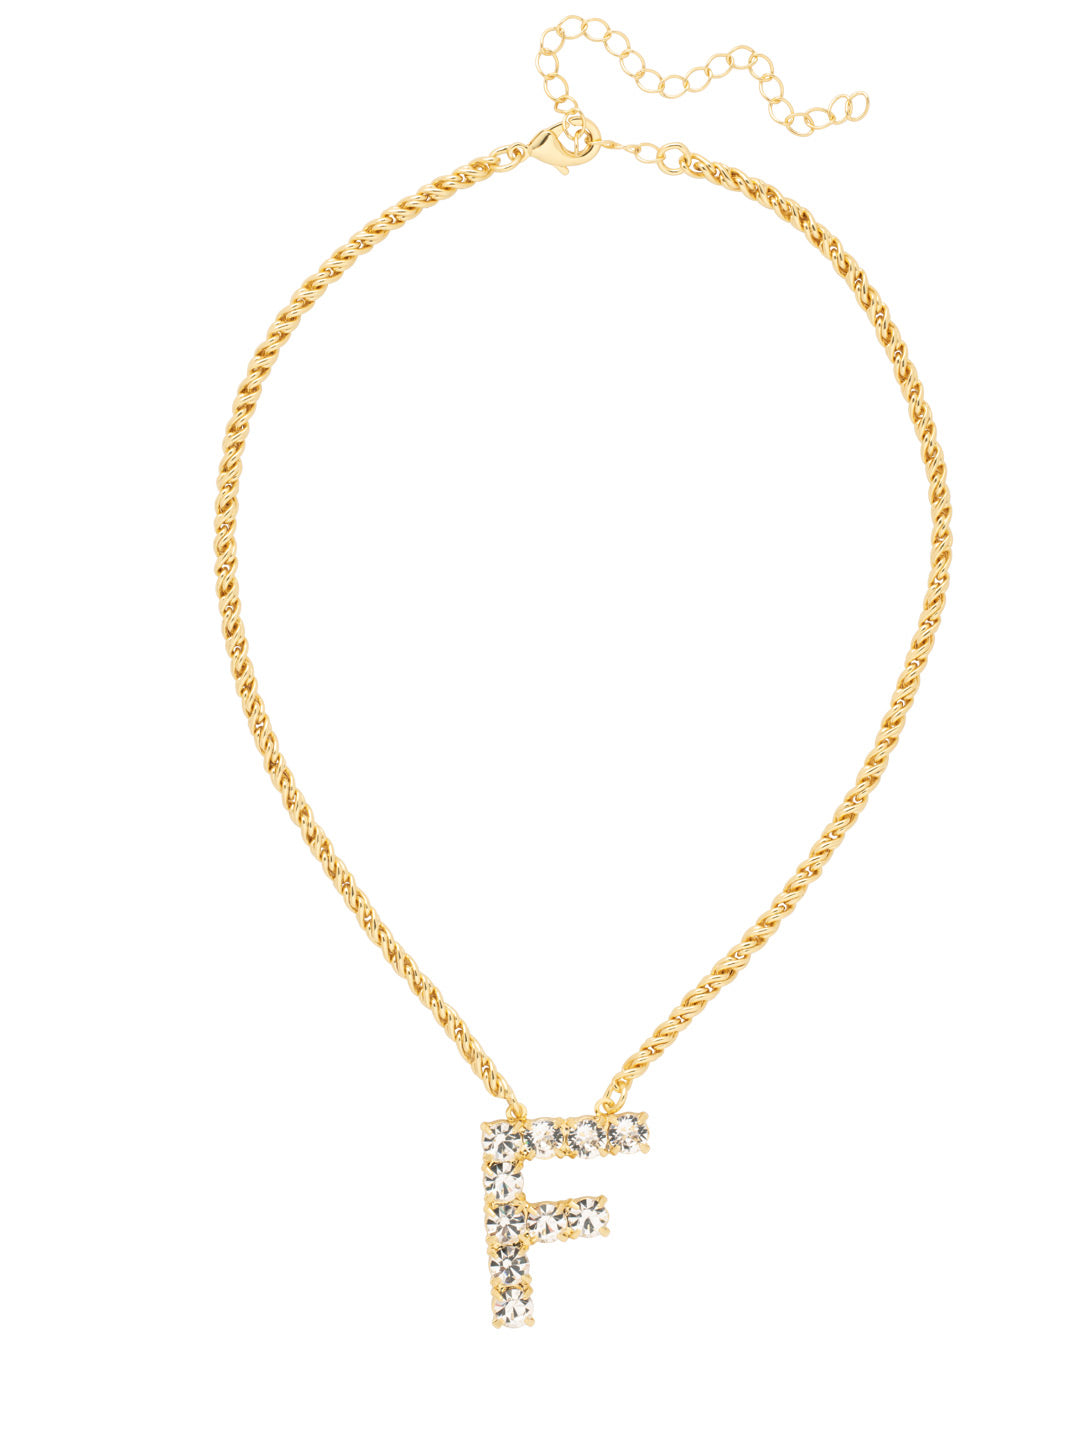 F Initial Rope Pendant Necklace - NFK25BGCRY